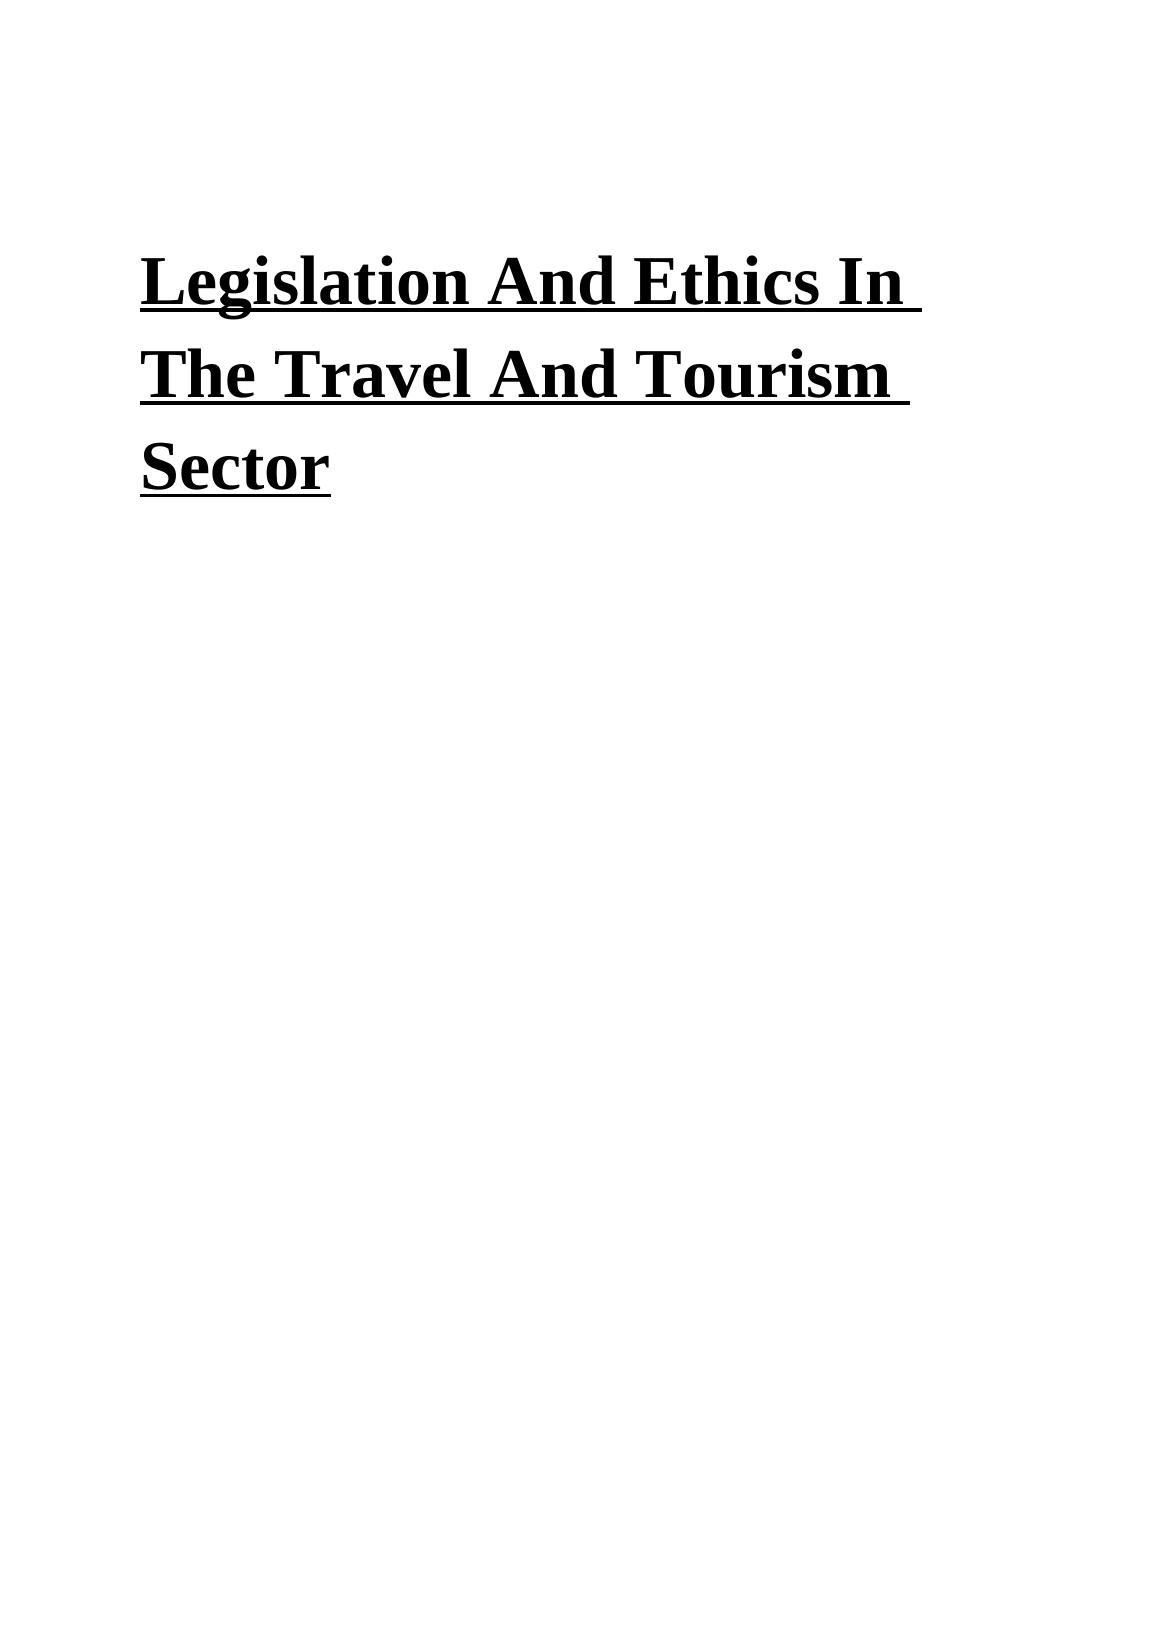 Legislation And Ethics In The Travel And Tourism Sector Contents_1